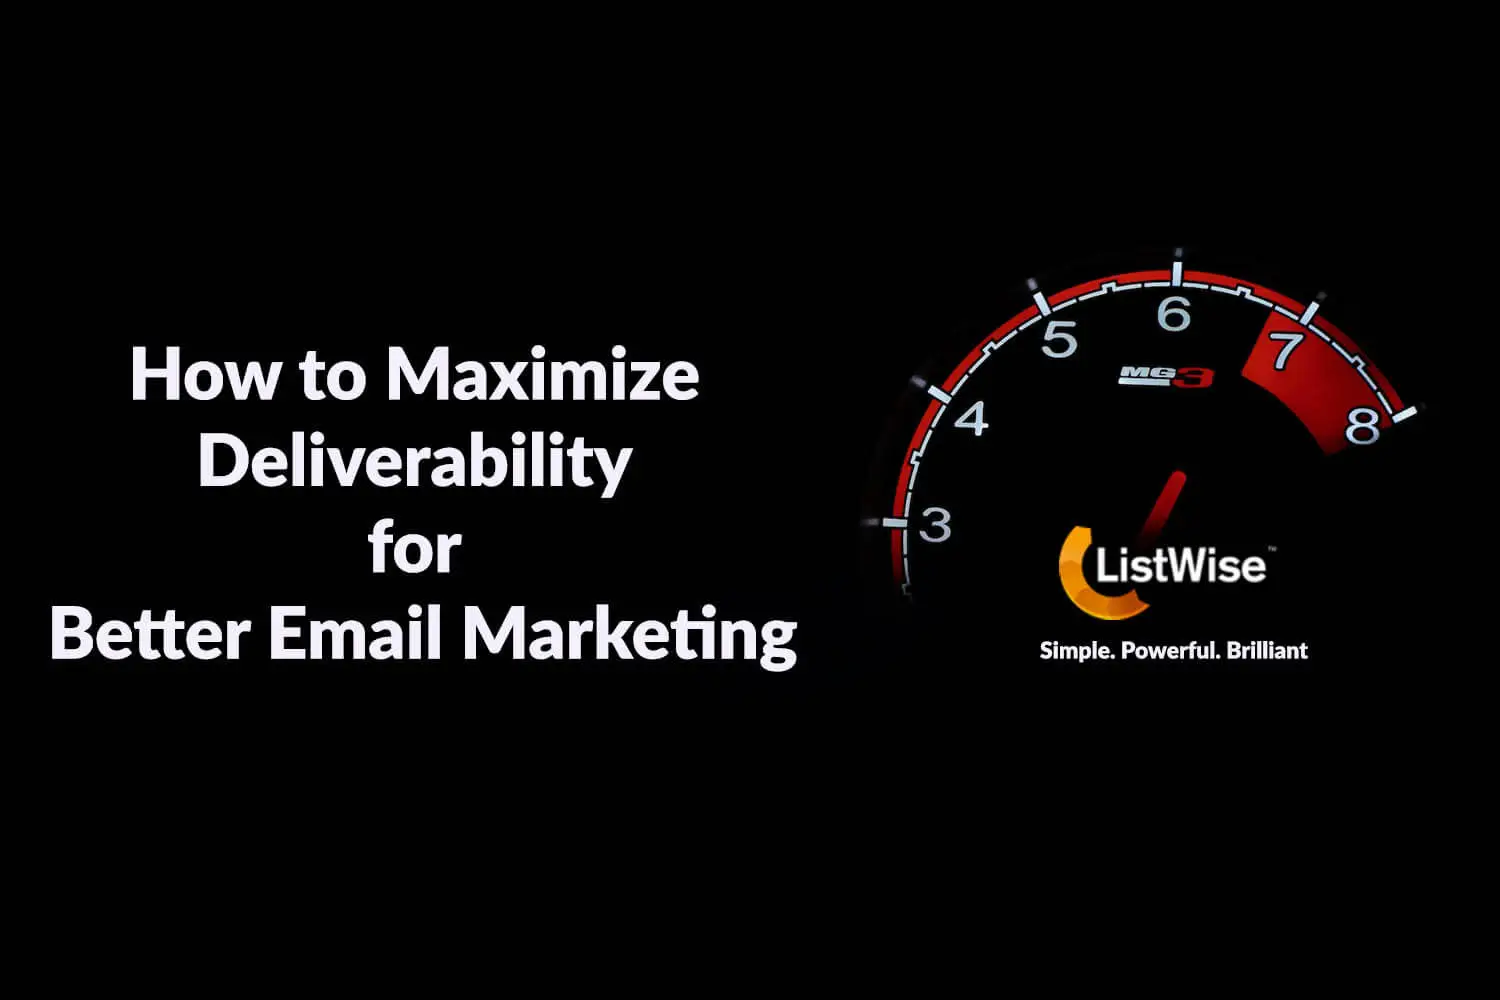 How to Maximize Deliverability for Better Email Marketing